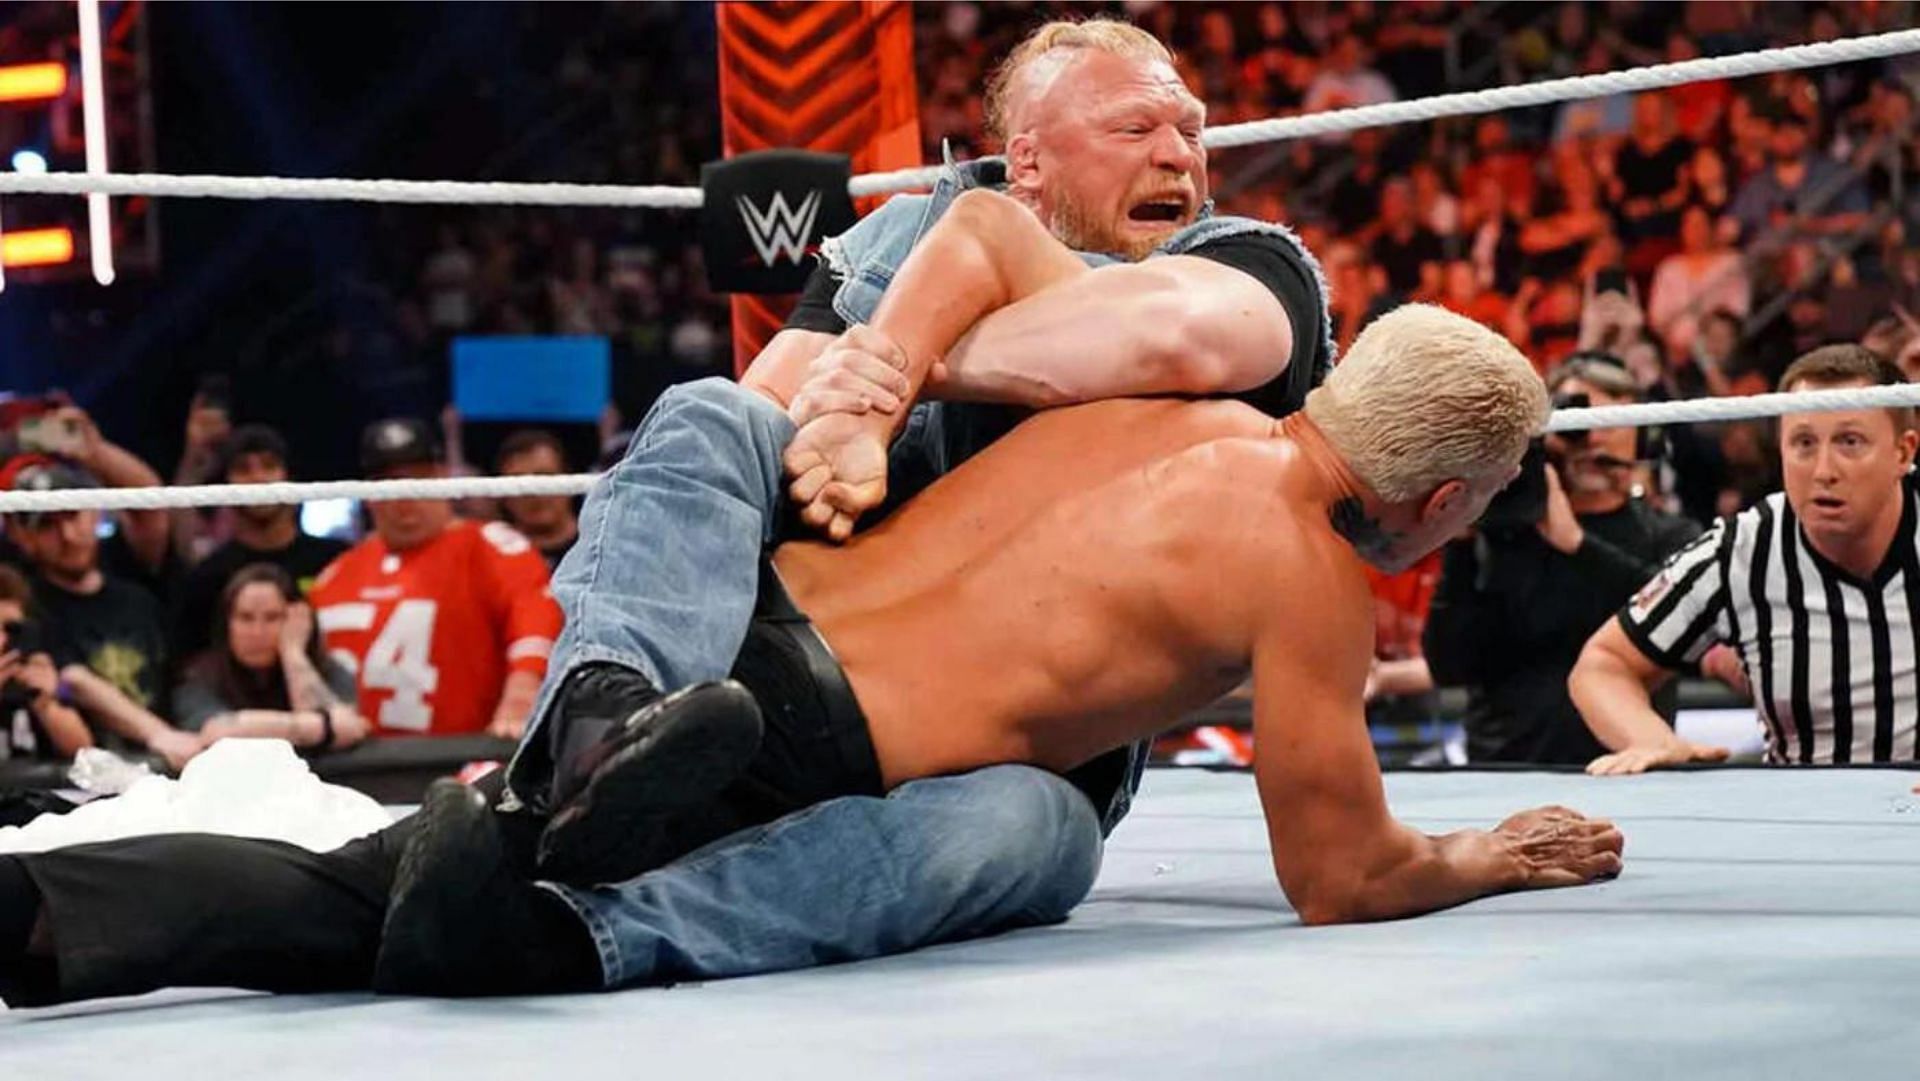 Brock Lesnar issued an open challenge for Night of Champions